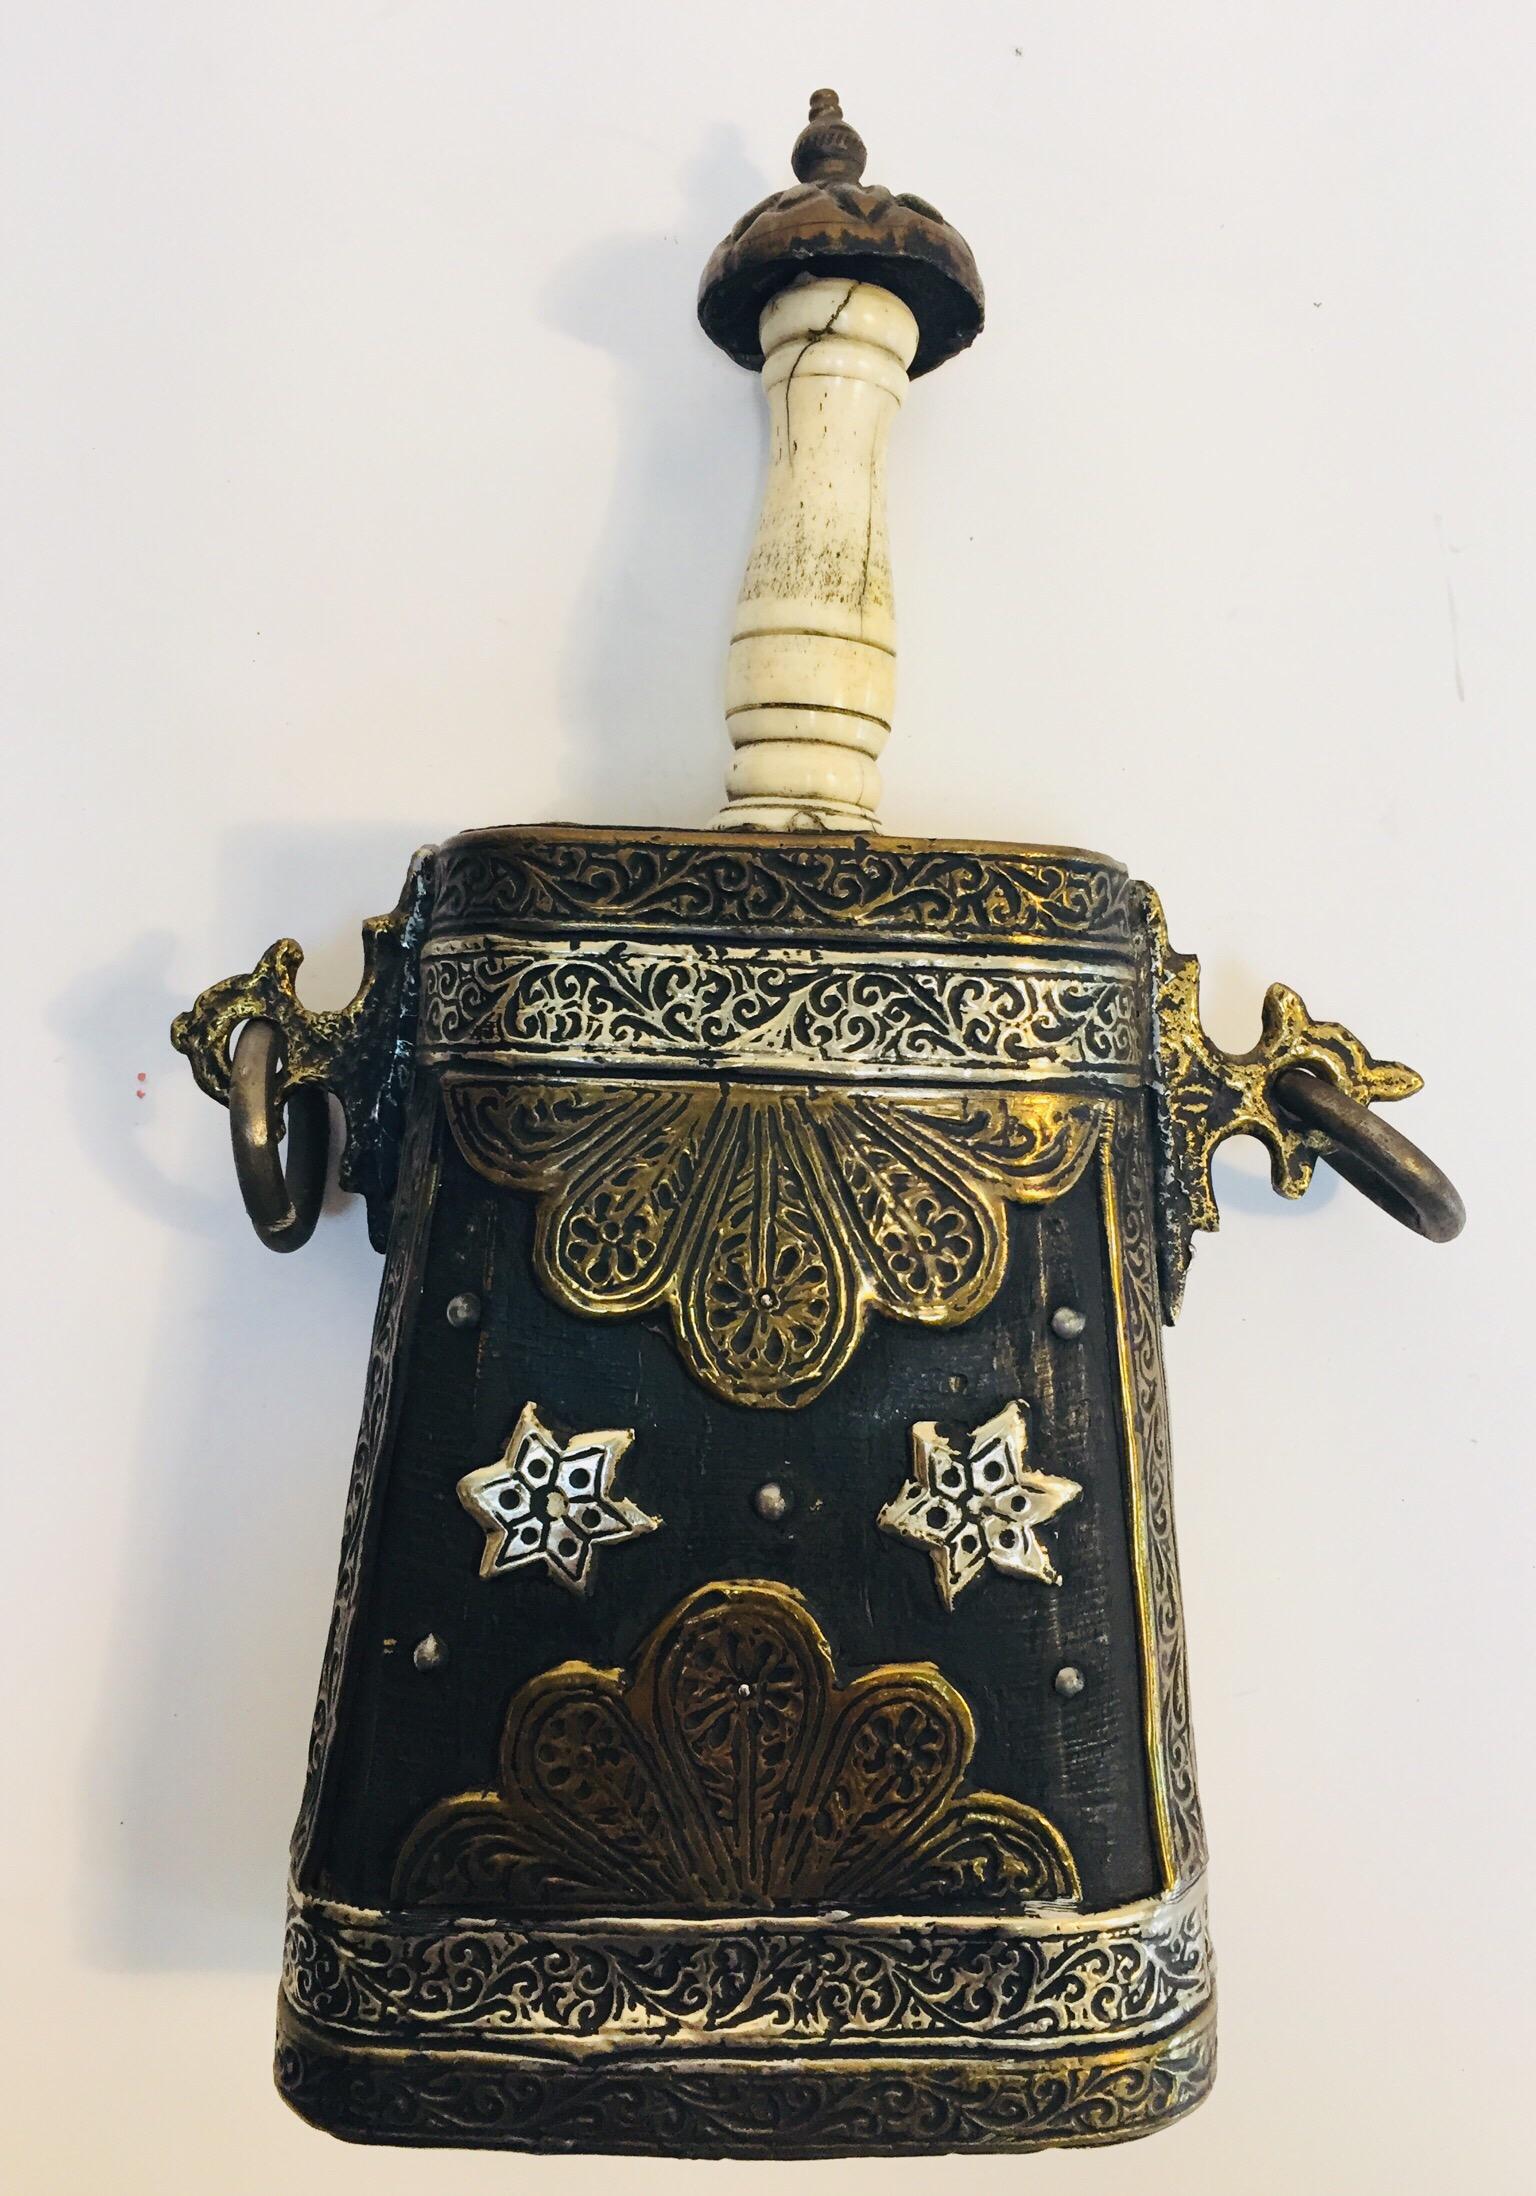 Hand made early 20th century Moroccan antique Berber case flask, carved wood covered with brass and silvered metal filigree, delicately hand-hammered metal with animals decor for power protection, the top straight neck spout is made out of carved